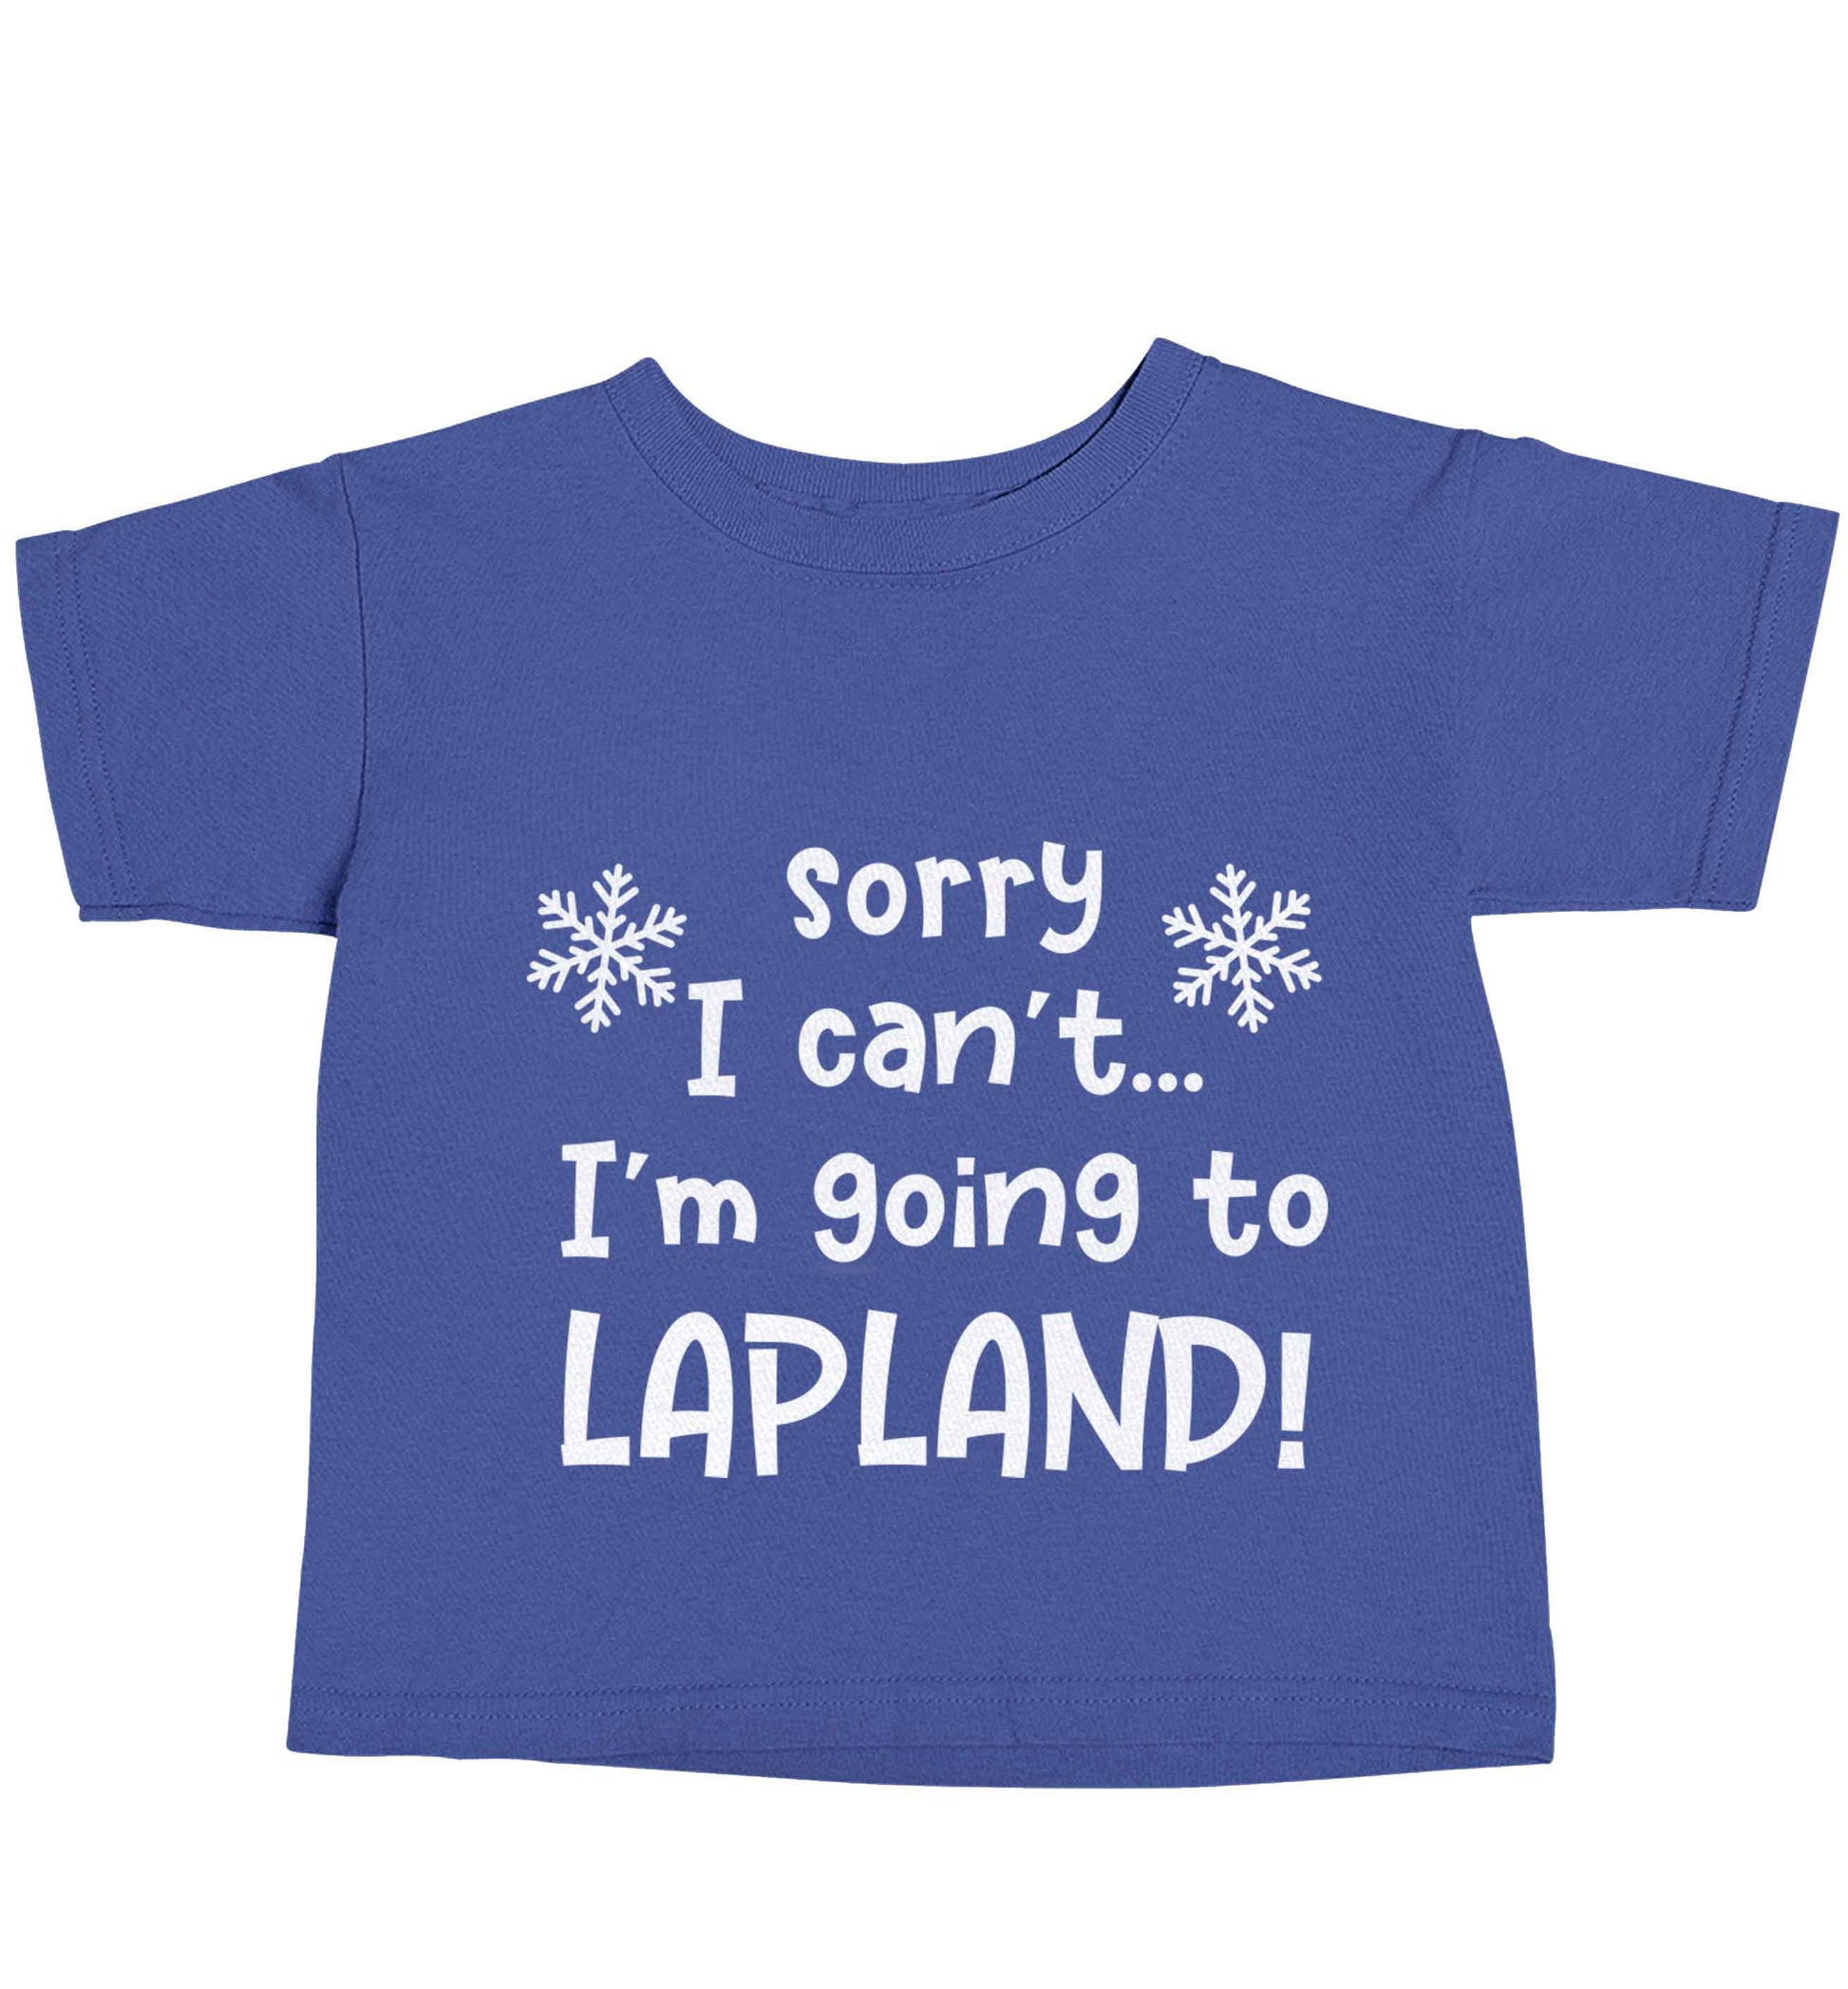 Sorry I can't I'm going to Lapland blue baby toddler Tshirt 2 Years